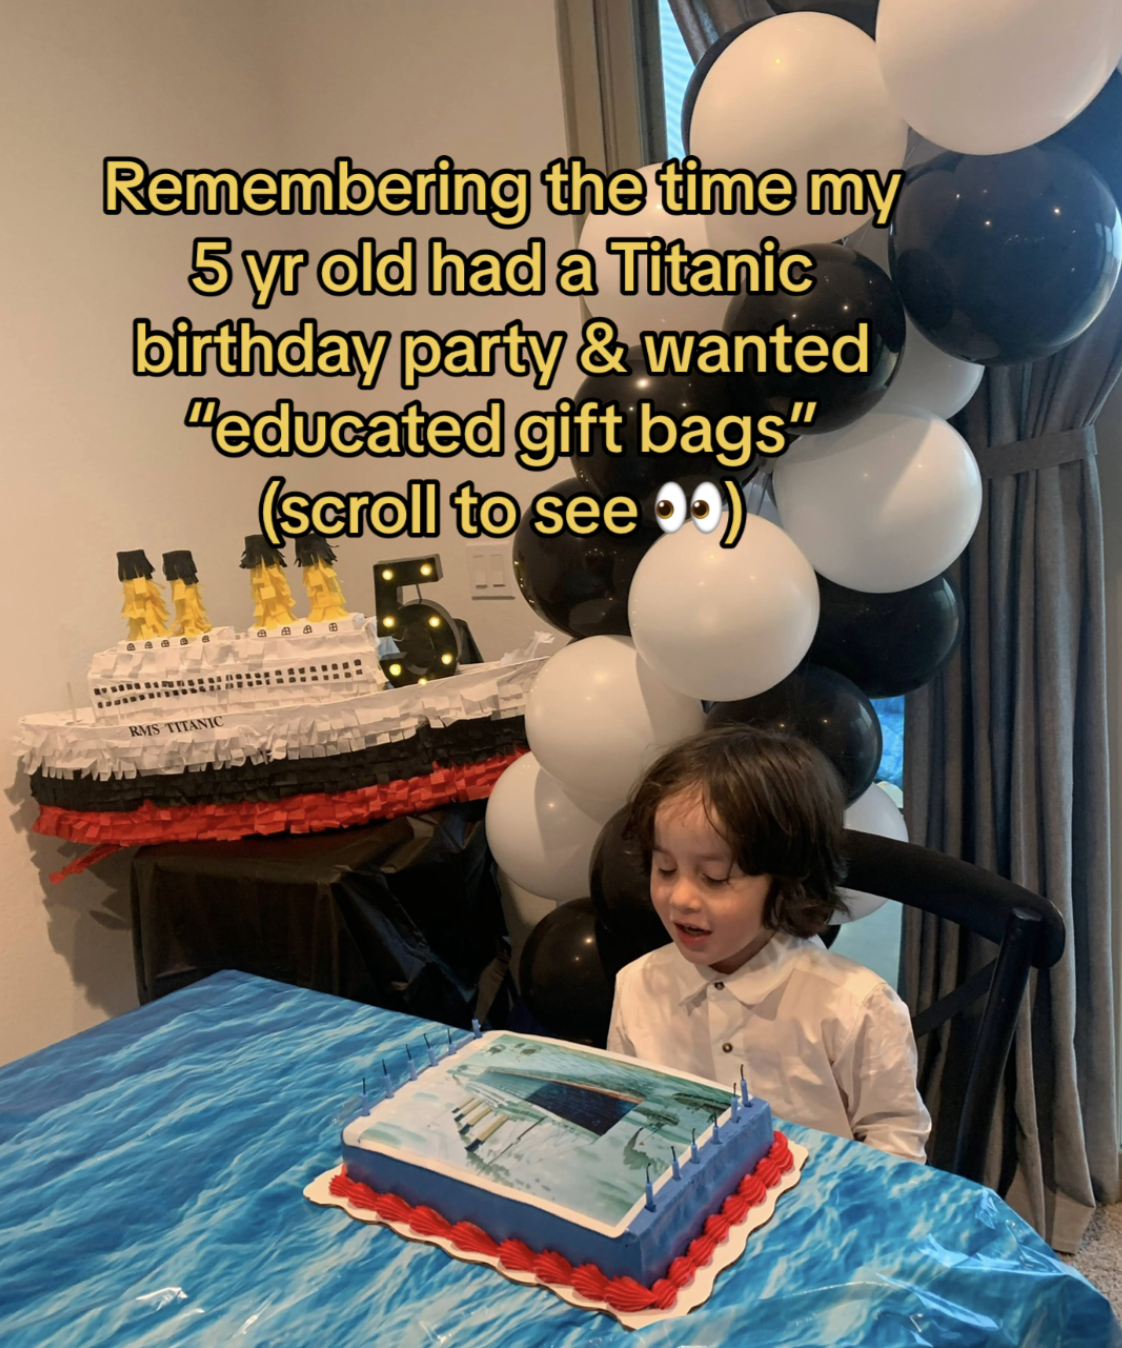 Titanic Themes Birthday Party - -  - Remembering the time my 5 yr old had a Titanic birthday party & wanted "educated gift bags" scroll to see Mel Llore Titanic